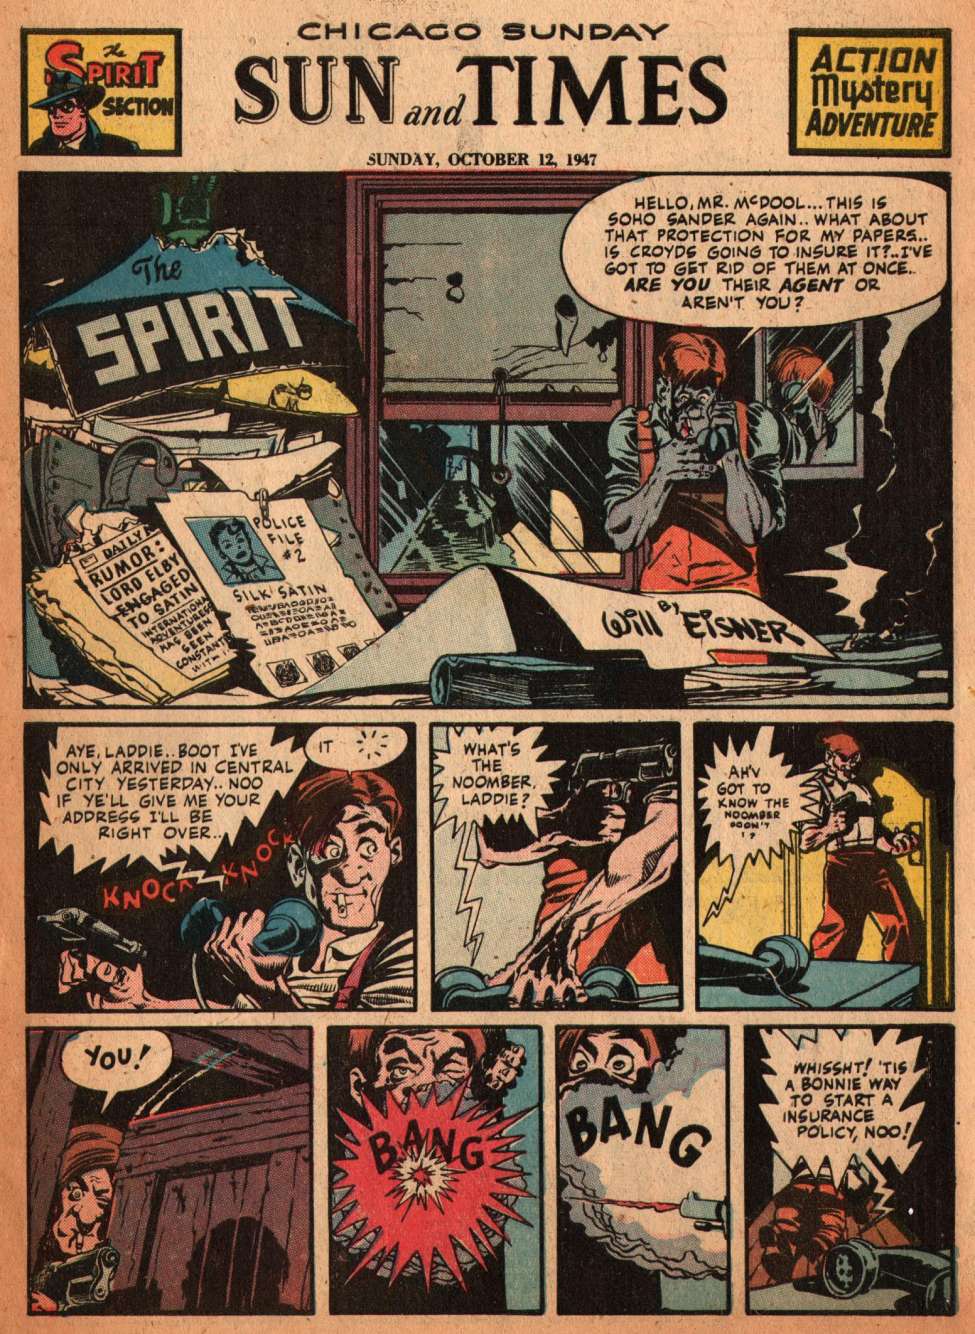 Comic Book Cover For The Spirit (1947-10-12) - Chicago Sun